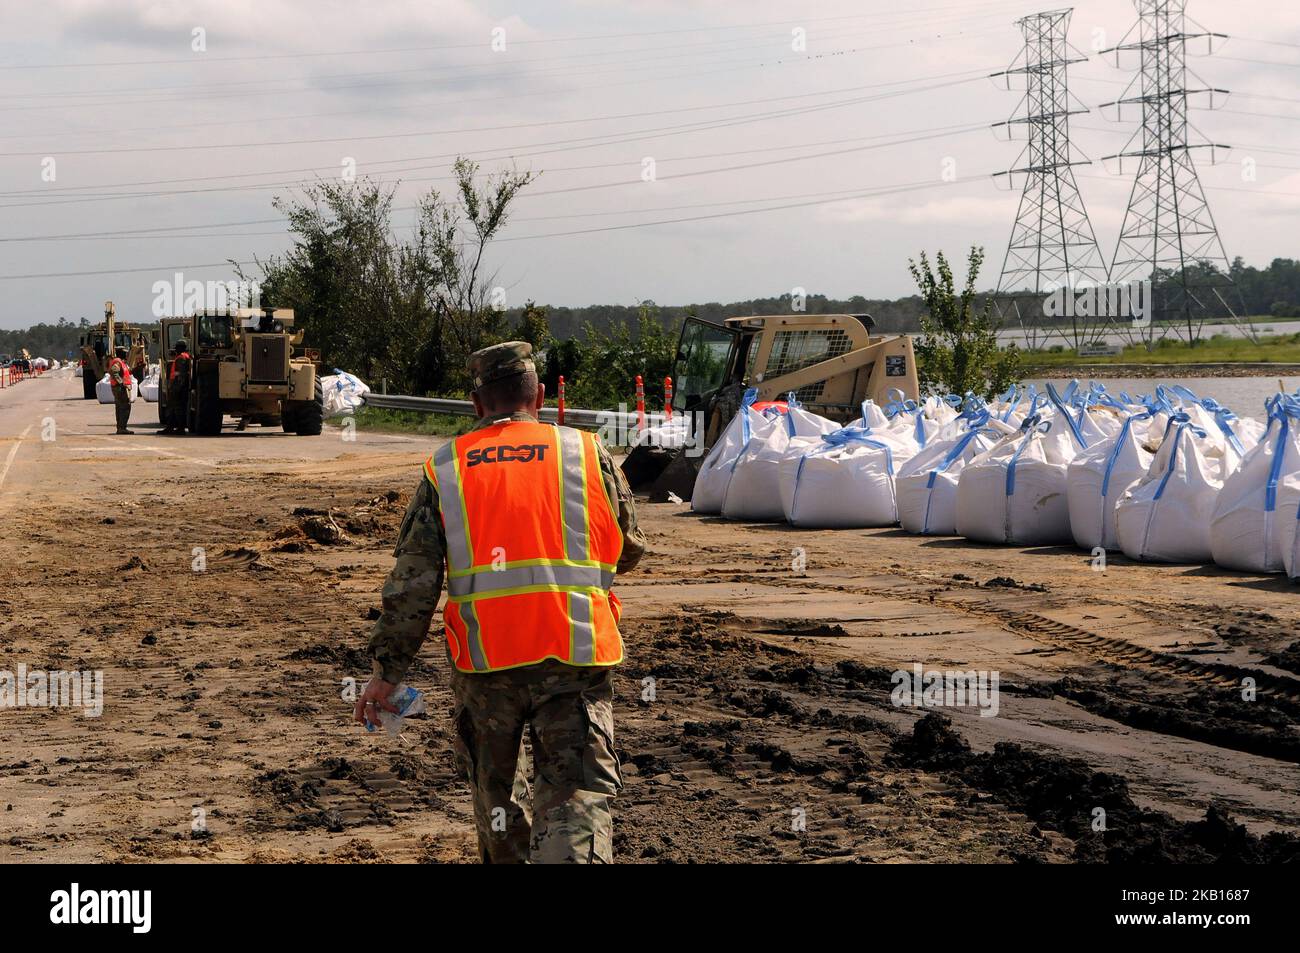 Conway, South Carolina, United States - Members of the South Carolina National Guard build a sandbag barrier on highway 501 along Lake Busbee in Conway, South Carolina on September 17, 2018, after the passing of Hurricane Florence. The City of Conway halted its previous efforts to stop the construction of the sandbag dam after being assured by state and county officials on September 17 the barrier would not cause additional flooding into Conway. (Photo by Paul Hennessy/NurPhoto) Stock Photo